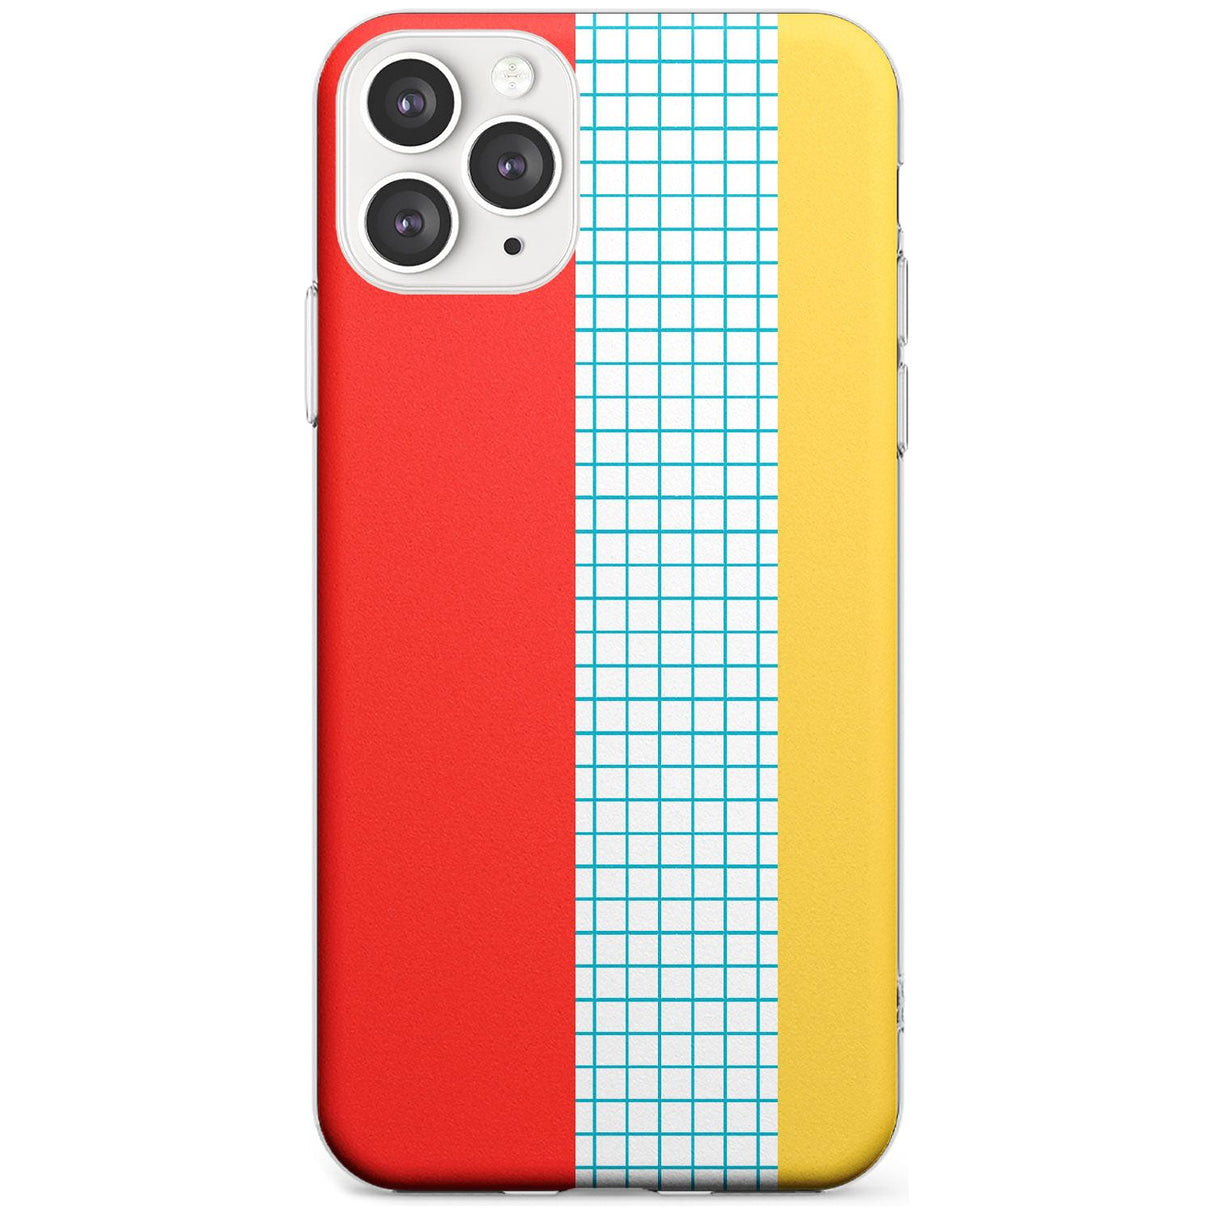 Abstract Grid Red, Blue, Yellow Slim TPU Phone Case for iPhone 11 Pro Max